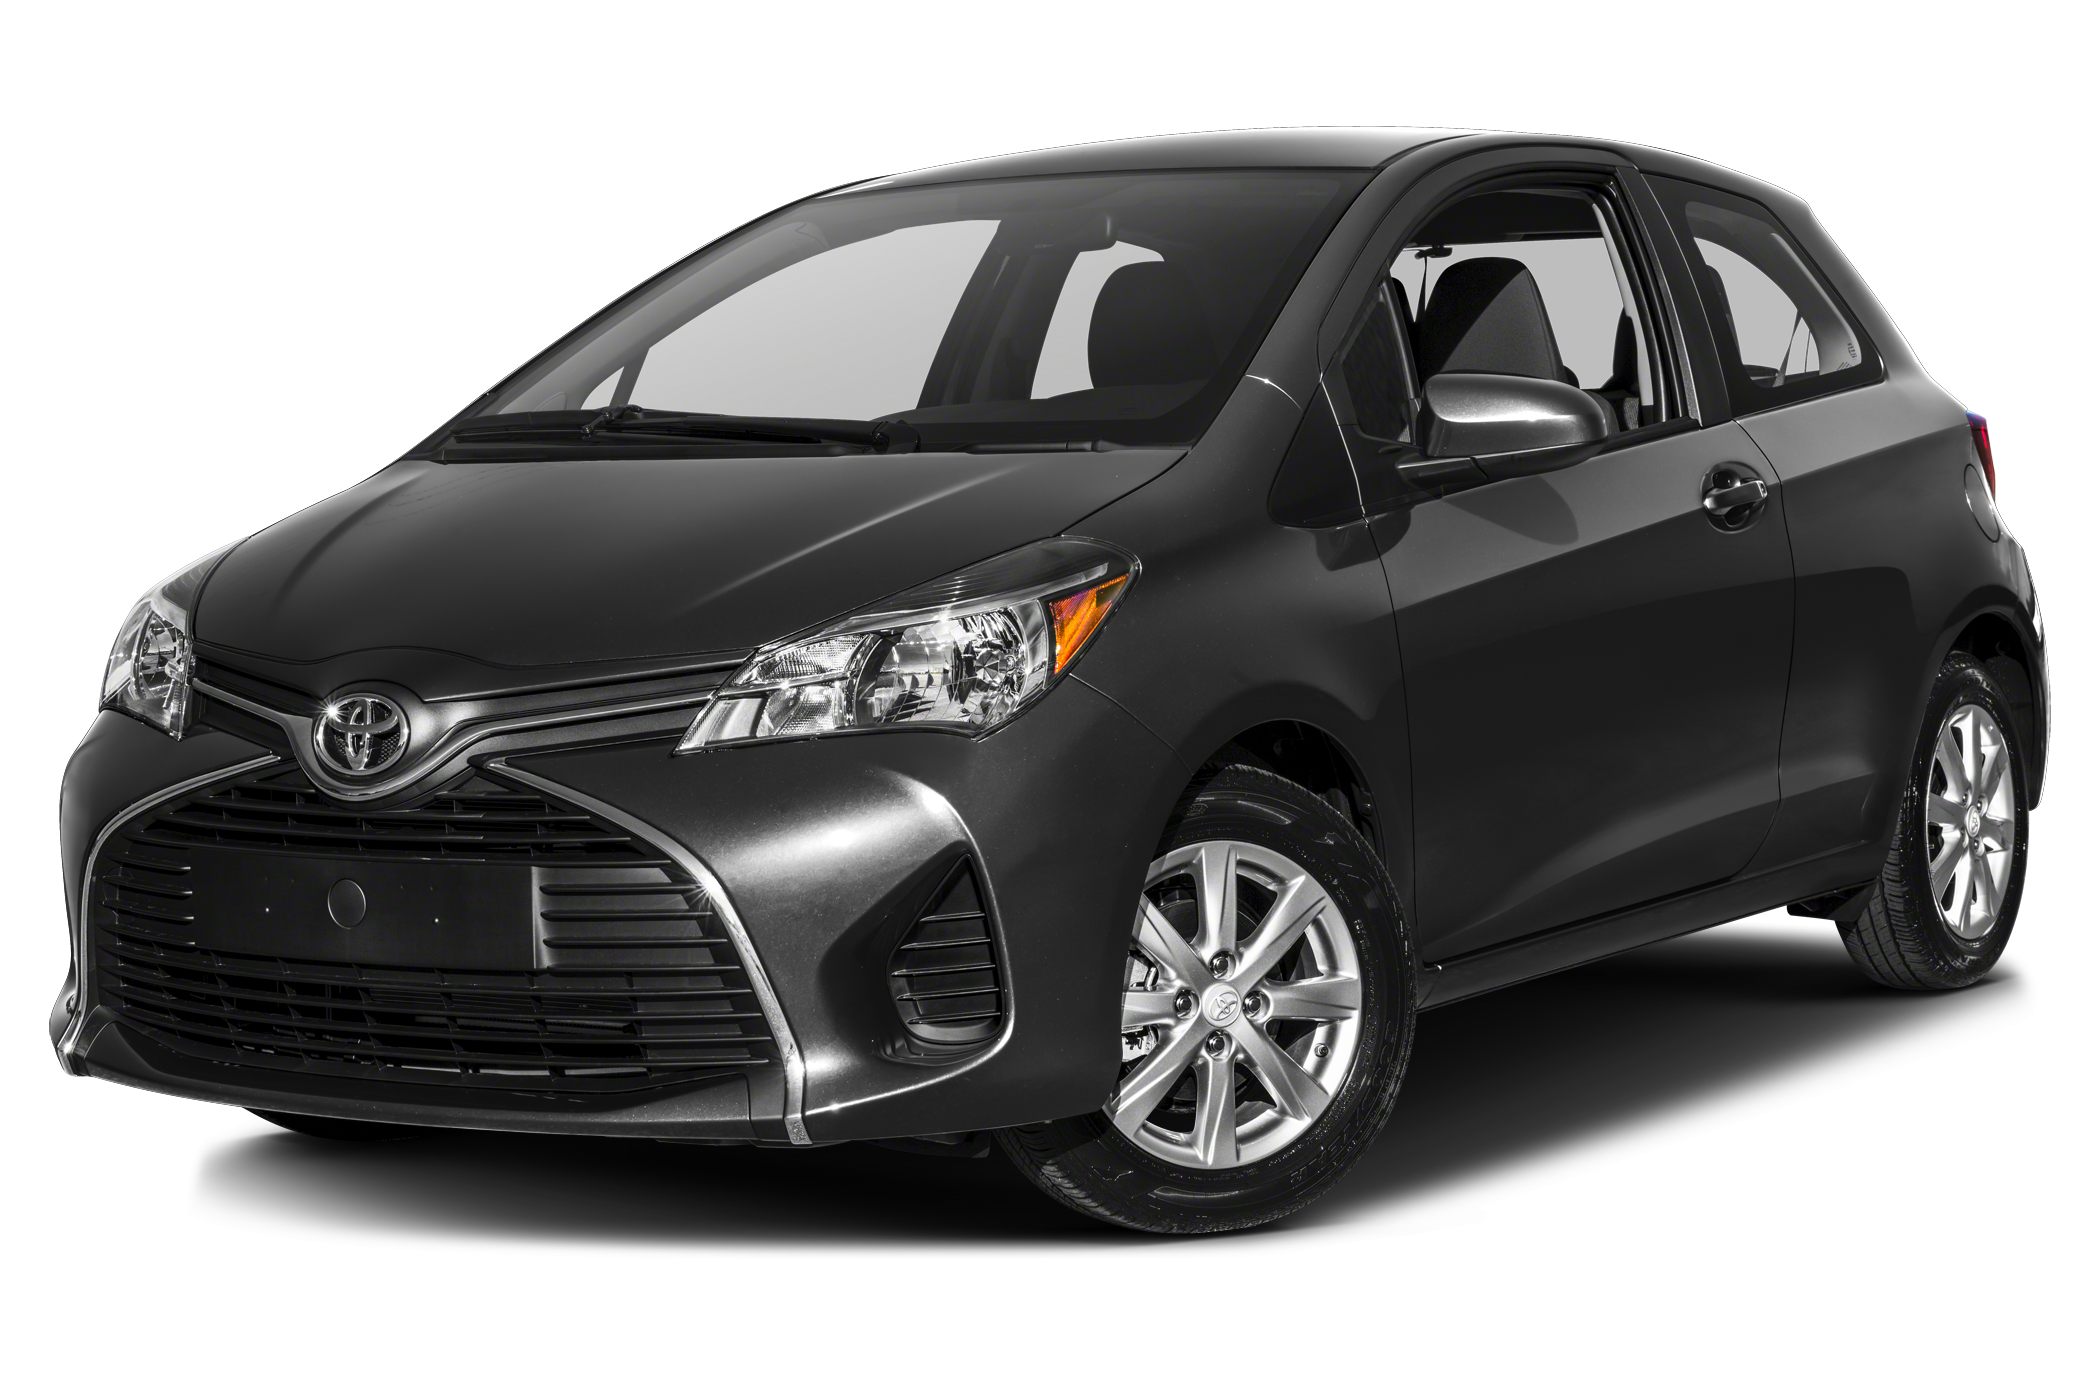 Toyota Yaris Backgrounds on Wallpapers Vista